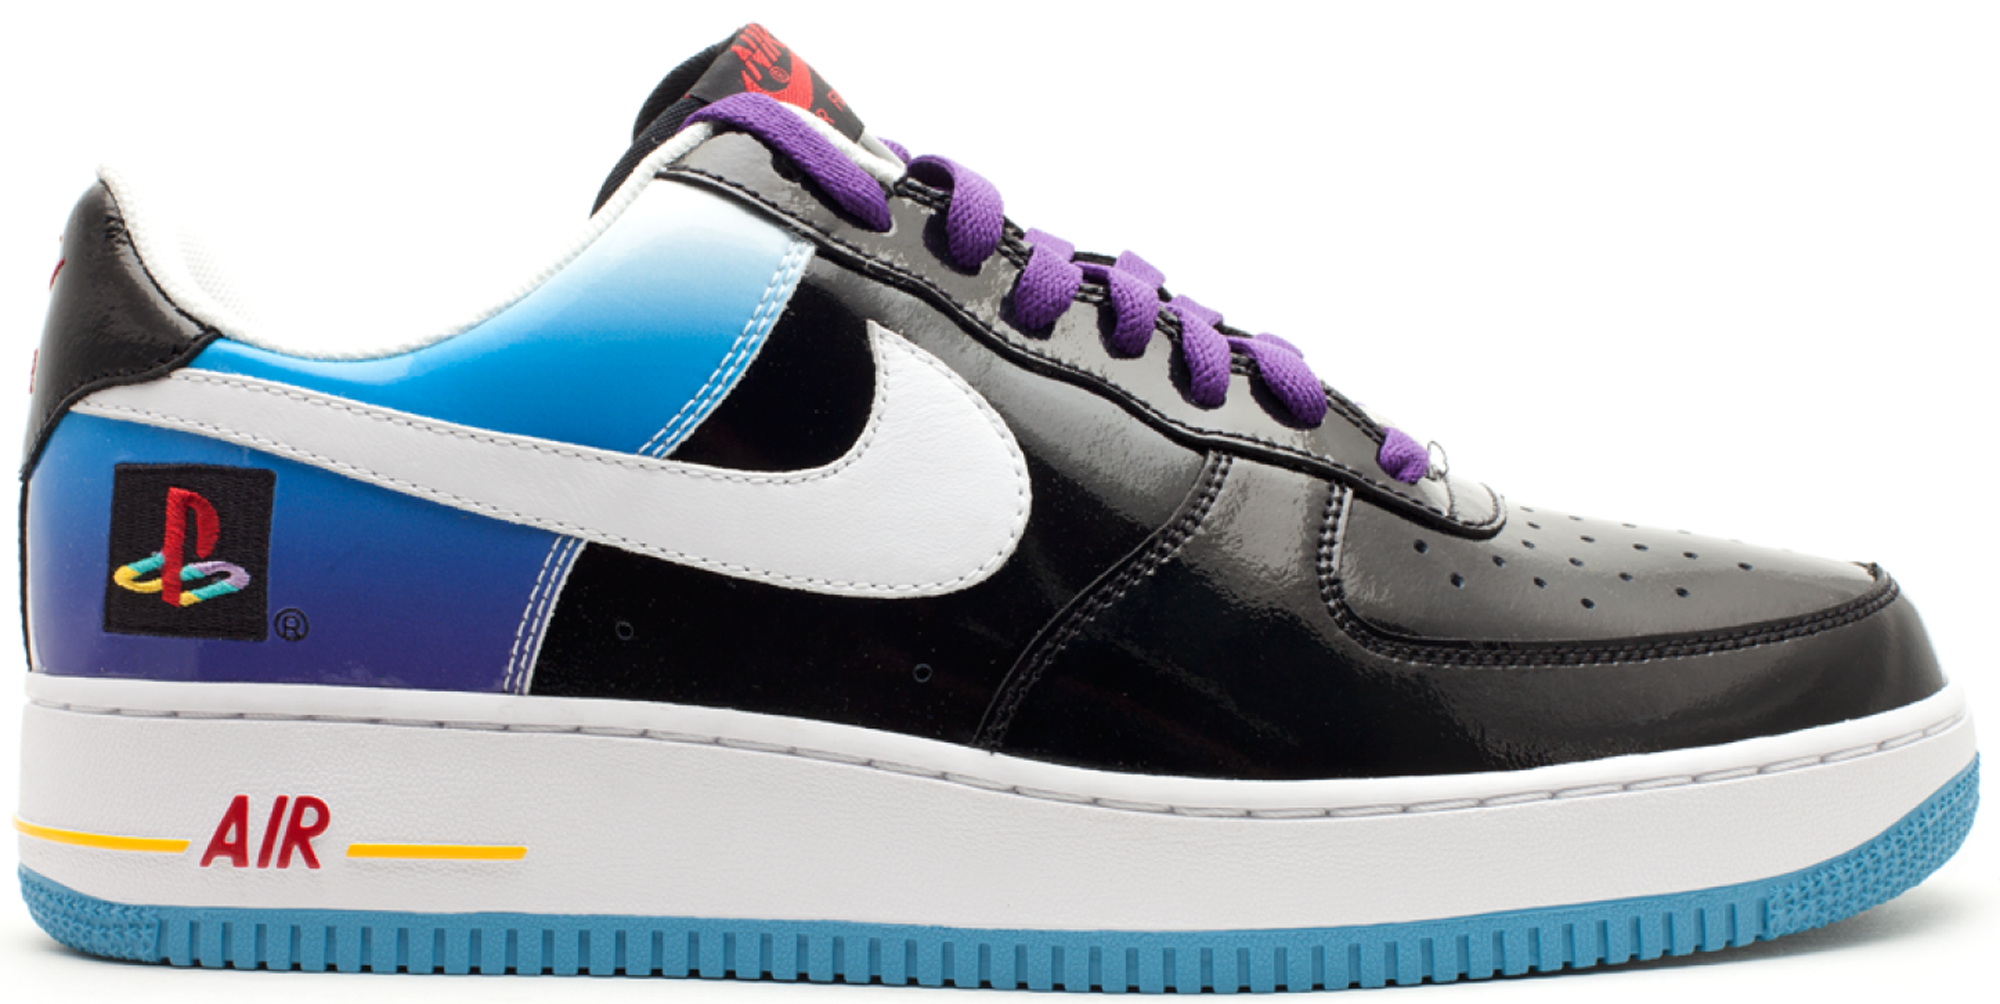 Nike Air Force 1 Low Playstation (2009 